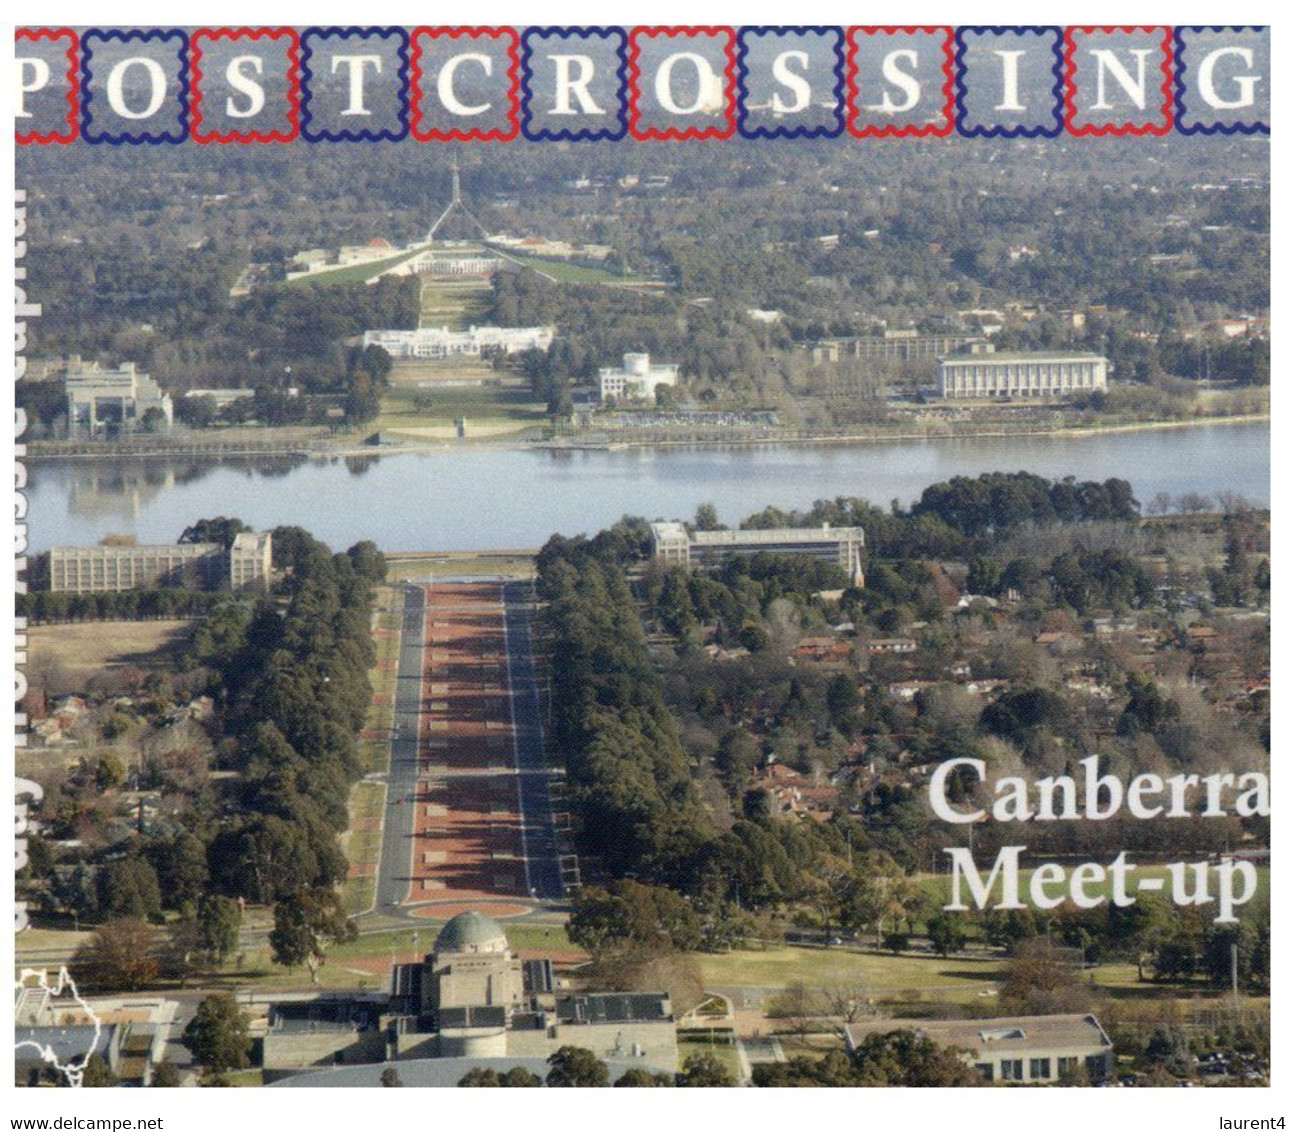 (NN 14) POSTCROSSING - Canberra Meet-up (with Stamp - 7 Jan 2016 Postmarking) - Canberra (ACT)